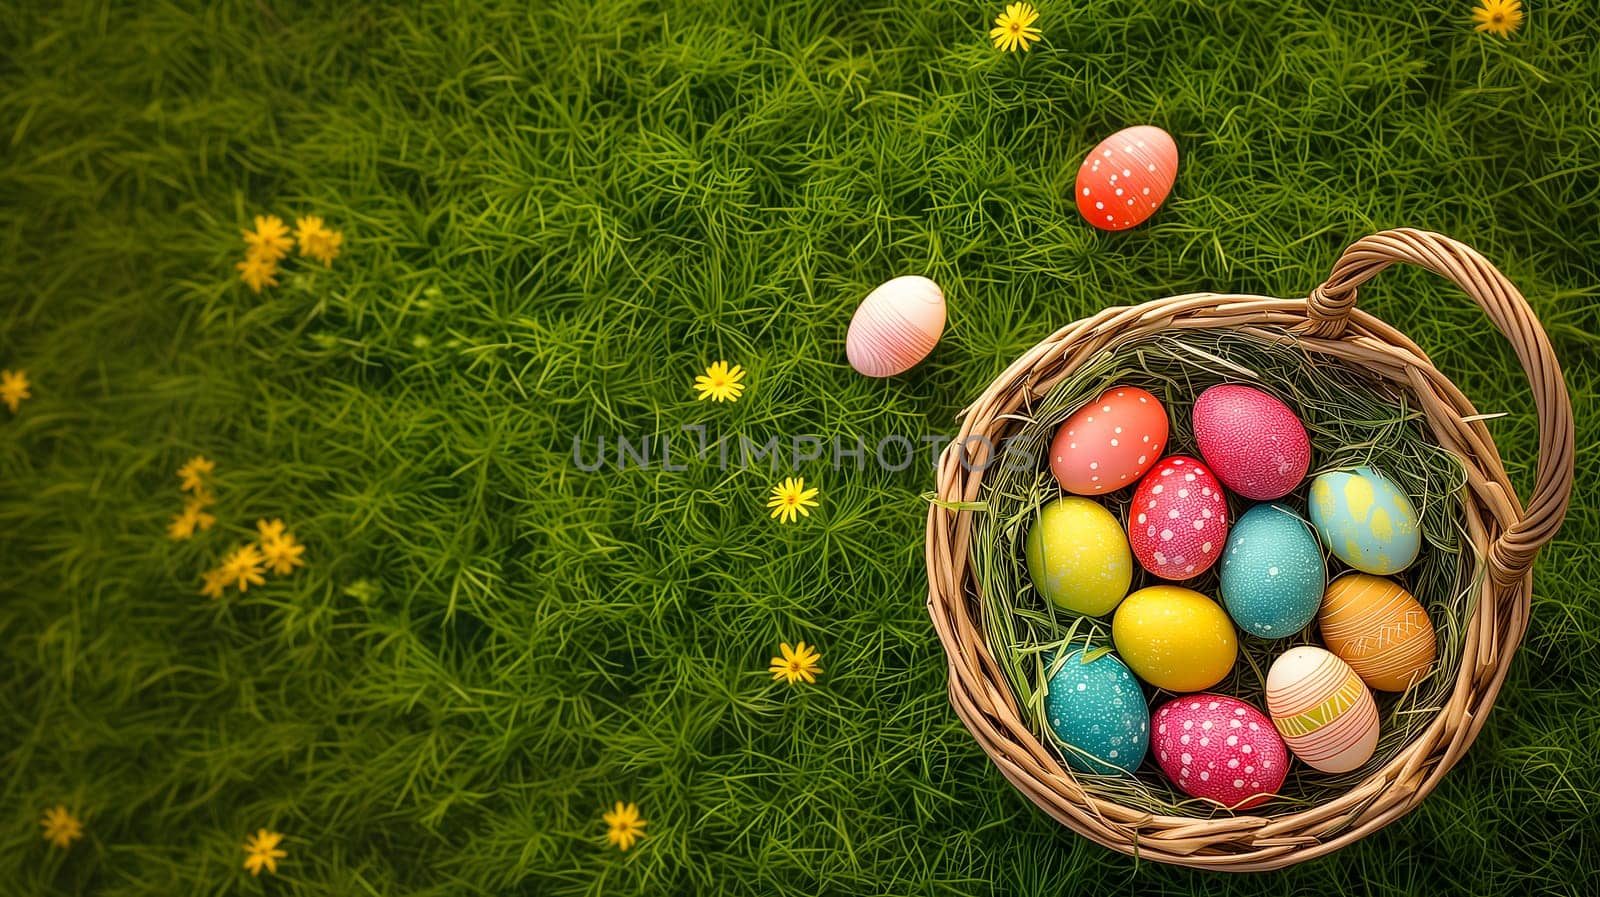 Easter basket with colorful eggs on a background of green grass meadow, high angle view. Neural network generated image. Not based on any actual scene or pattern.